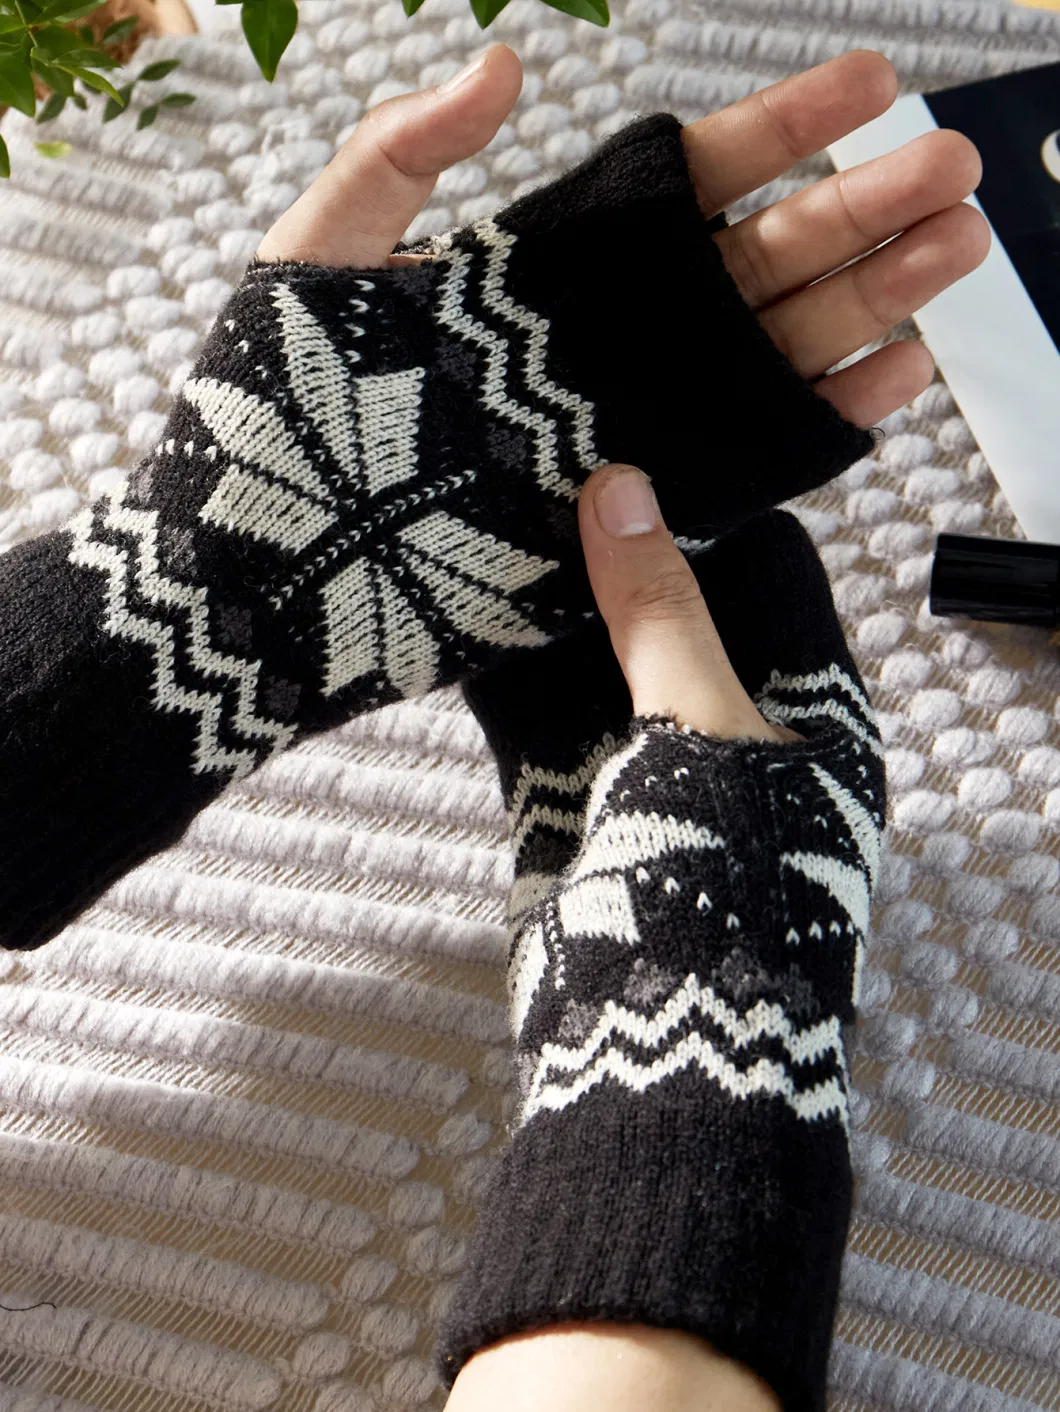 Hold Plus Winter Gloves Acrylic Wool Cotton Warm Keeping Fake Sleeves Maple Leaves Pattern